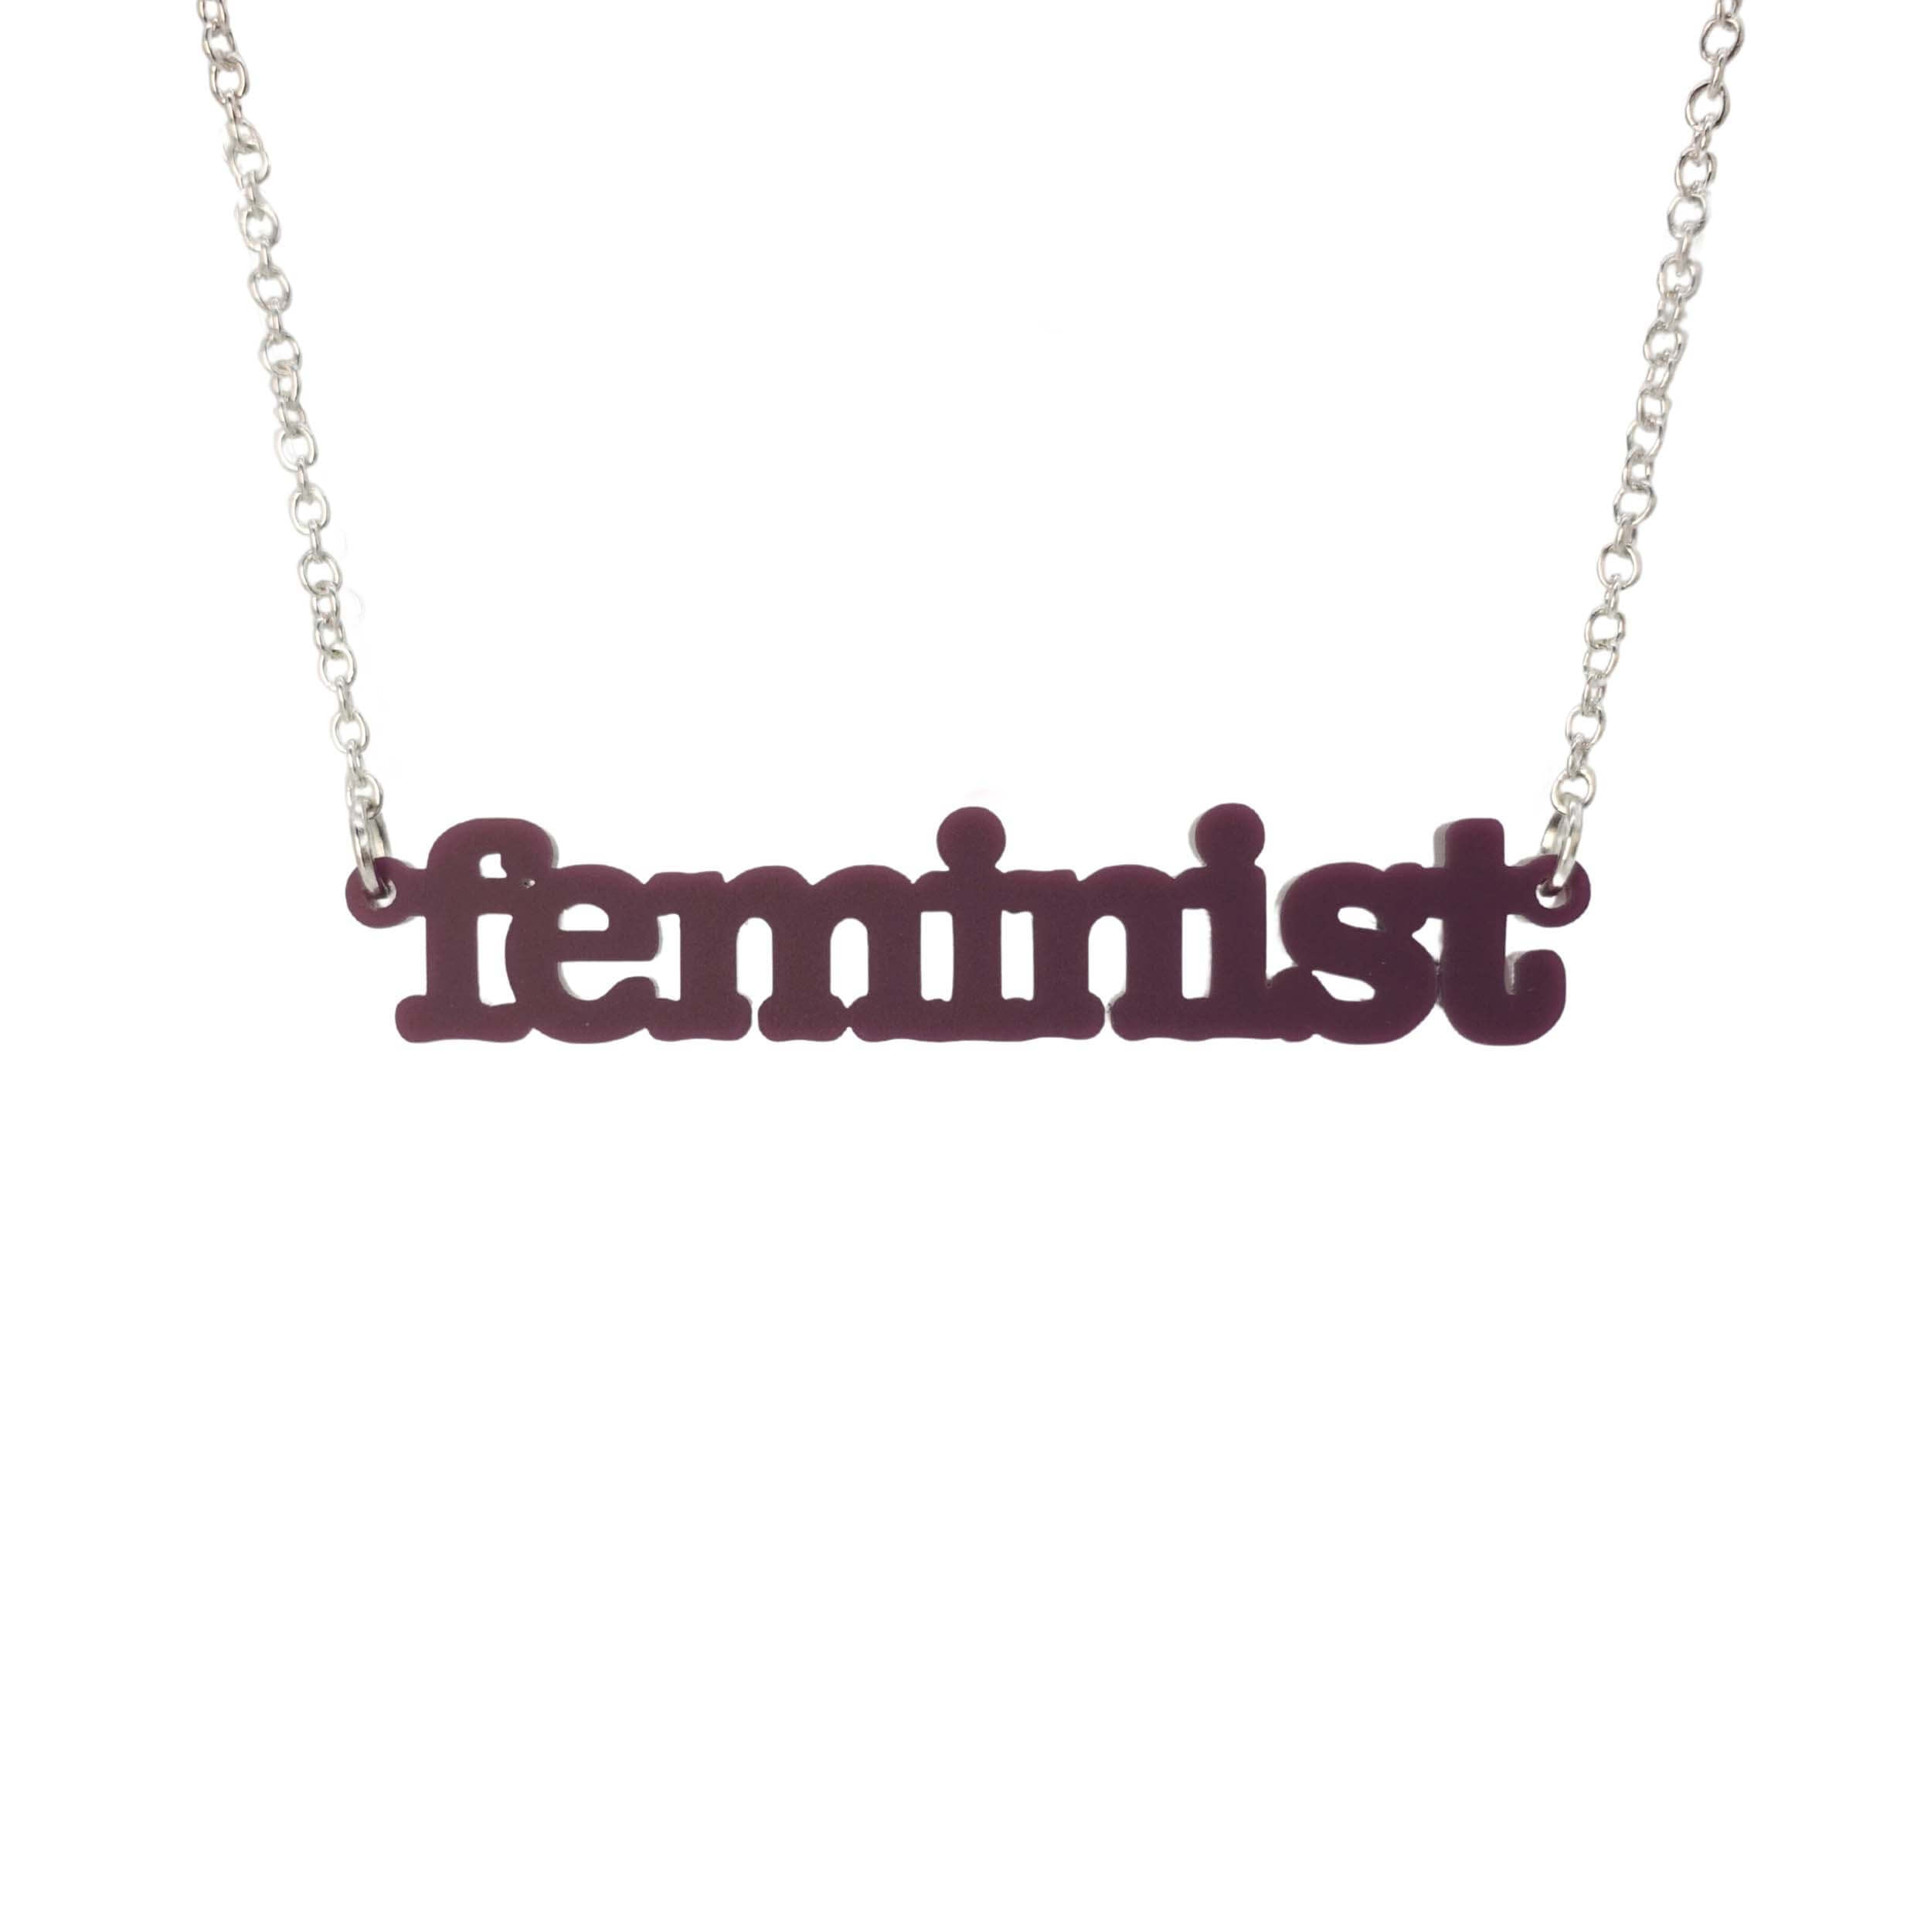 Cassis Feminist necklace shown hanging on a white background. 